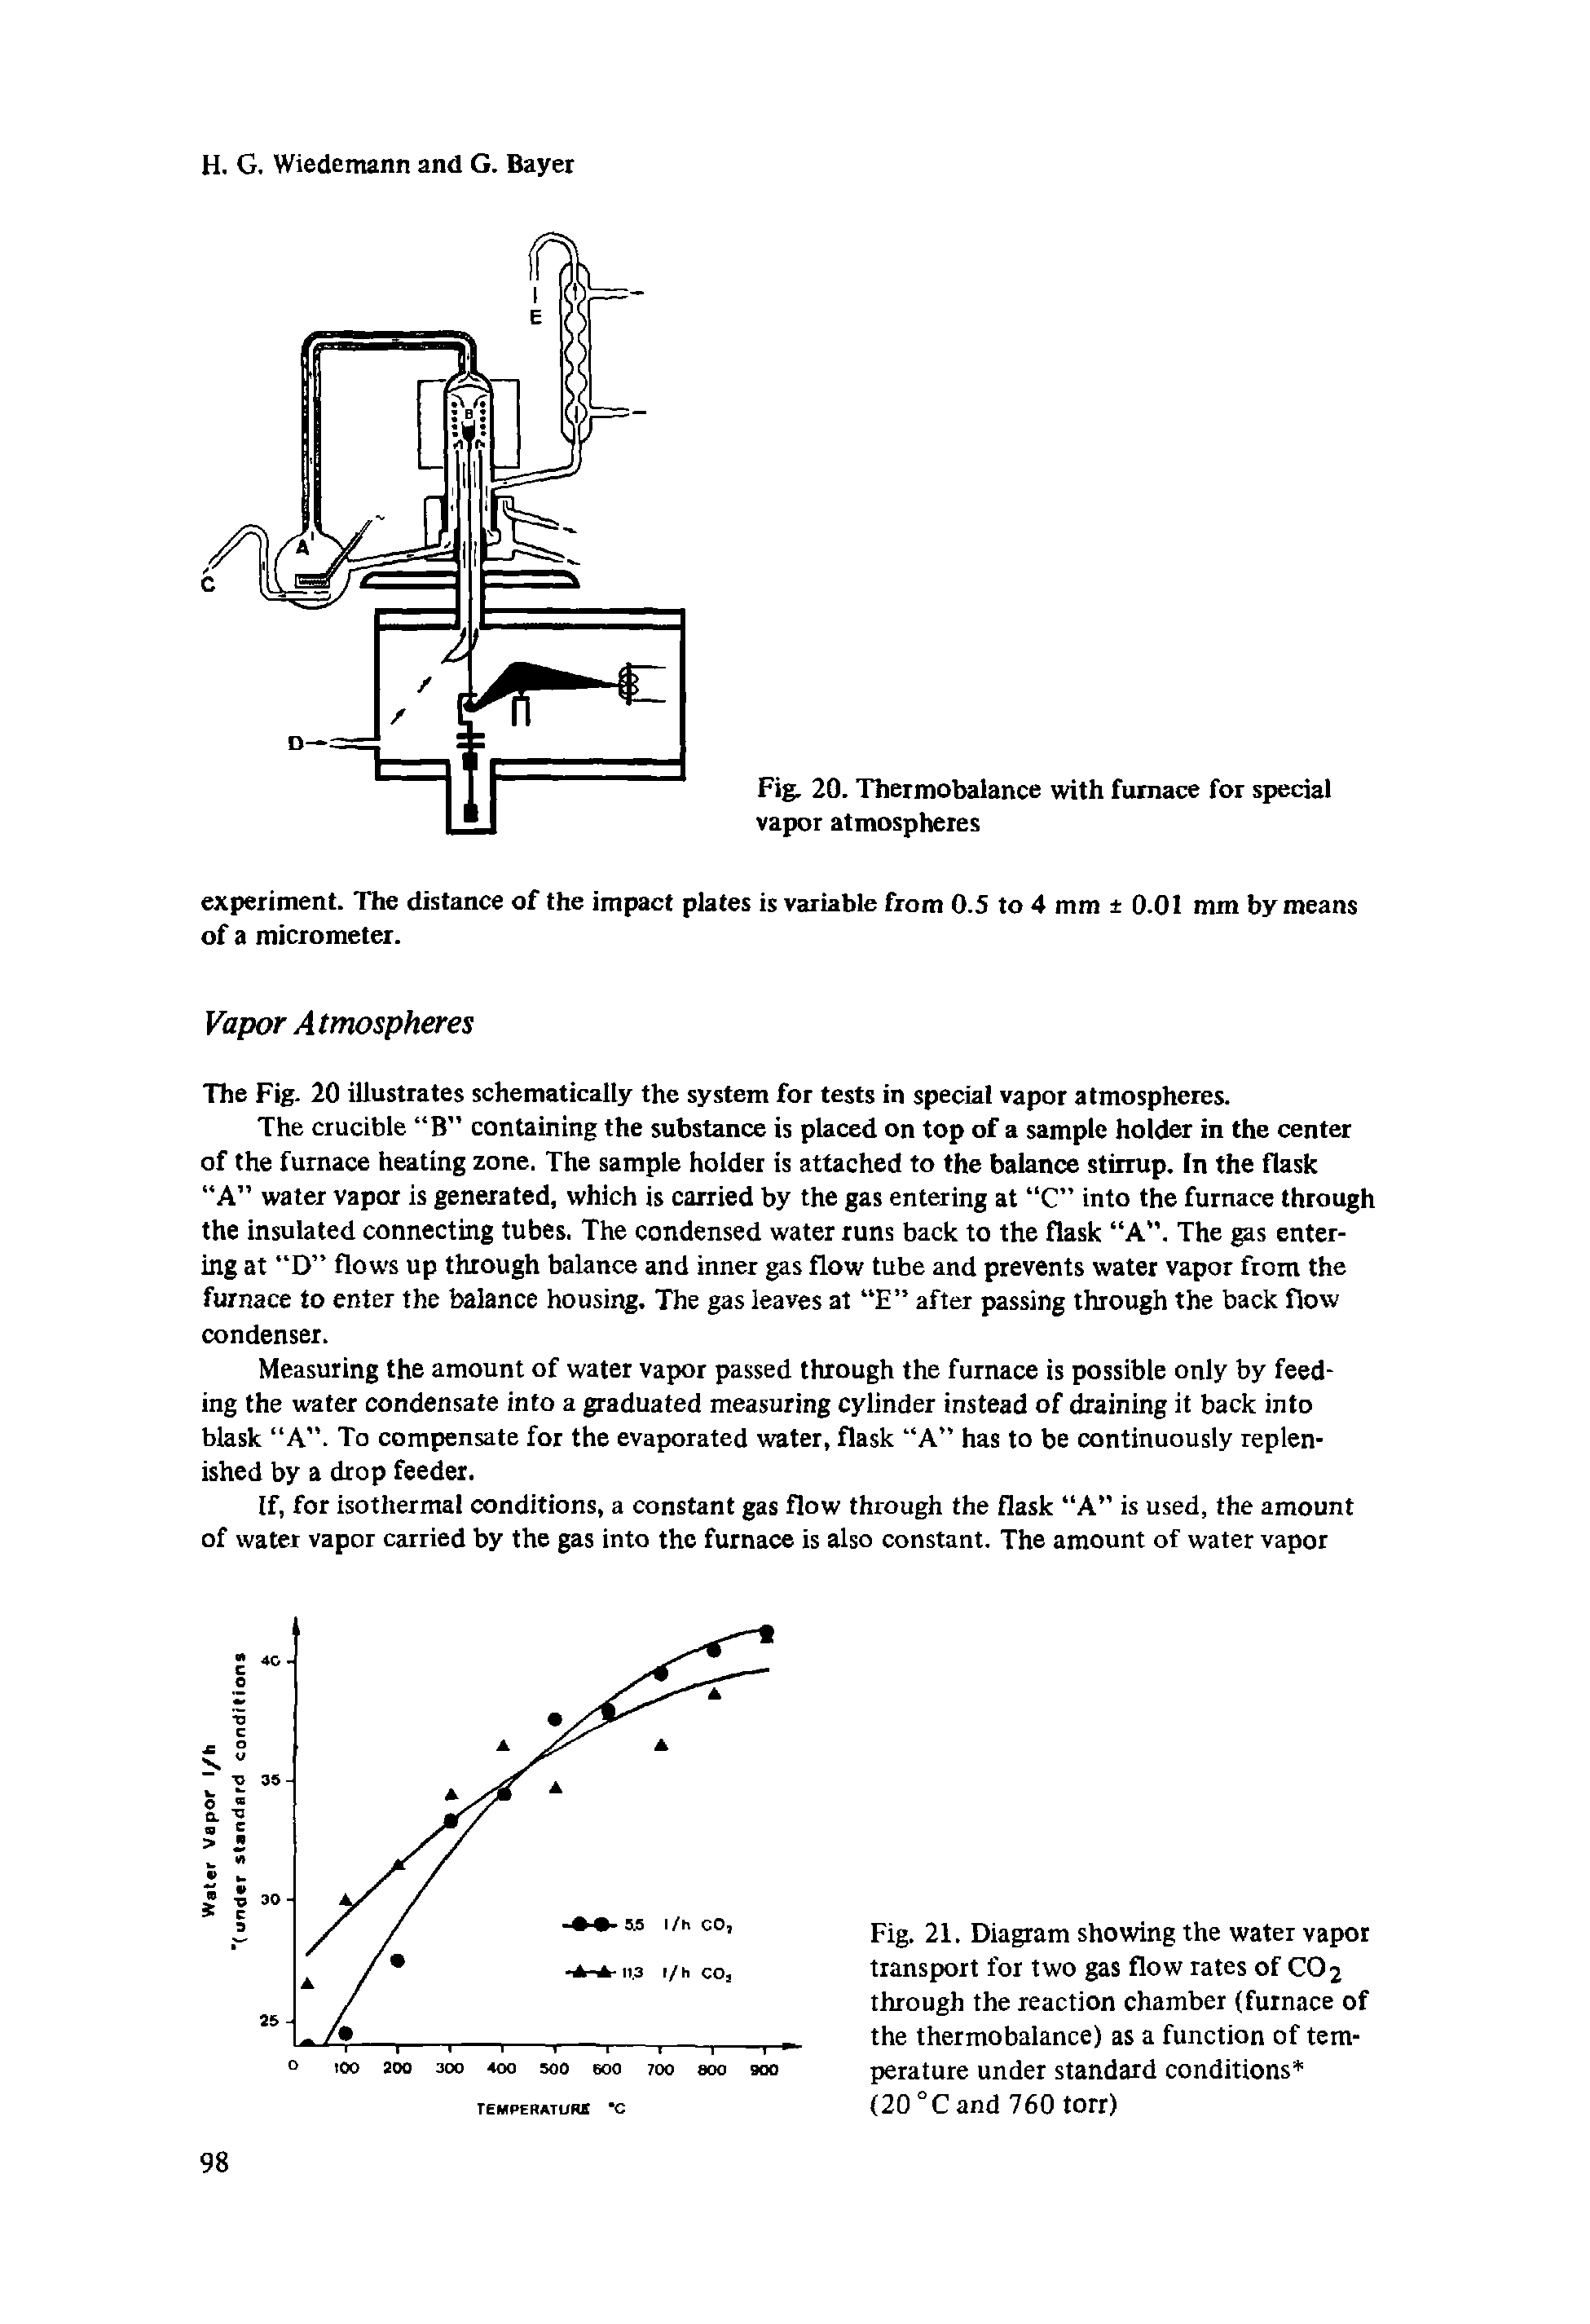 Fig. 21. Diagram showing the water vapor transport for two gas flow rates of CO 2 through the reaction chamber (furnace of the thermobalance) as a function of temperature under standard conditions ...